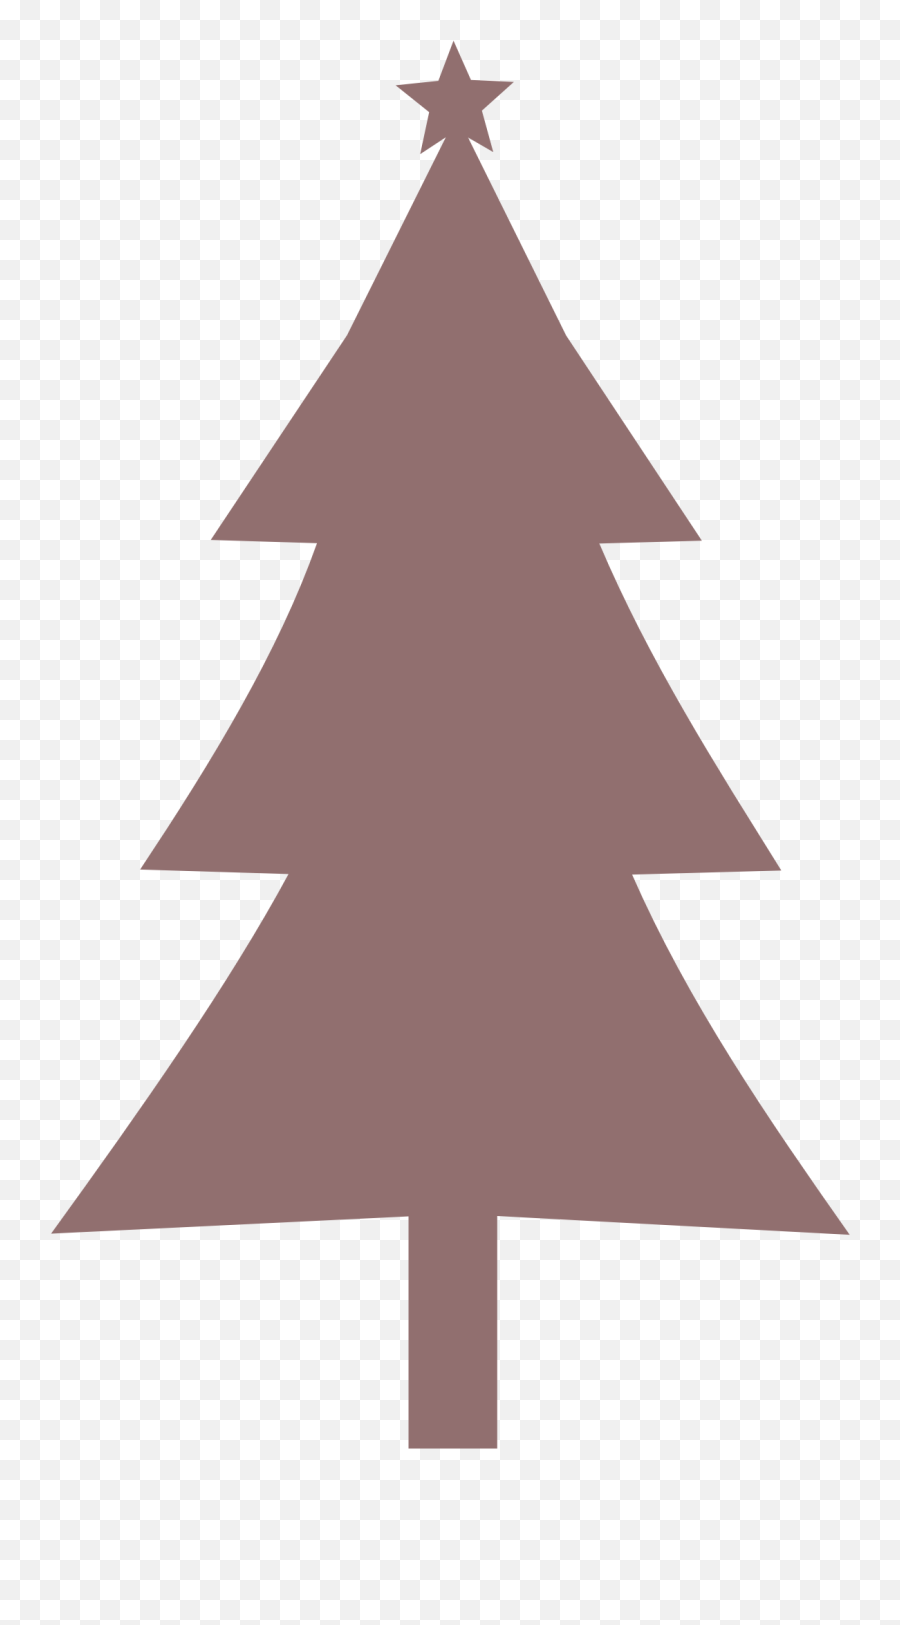 Christmas Tree Silhouette Png Picture 515327 - Silhouette Christmas Tree Clipart,Tree Clipart Png